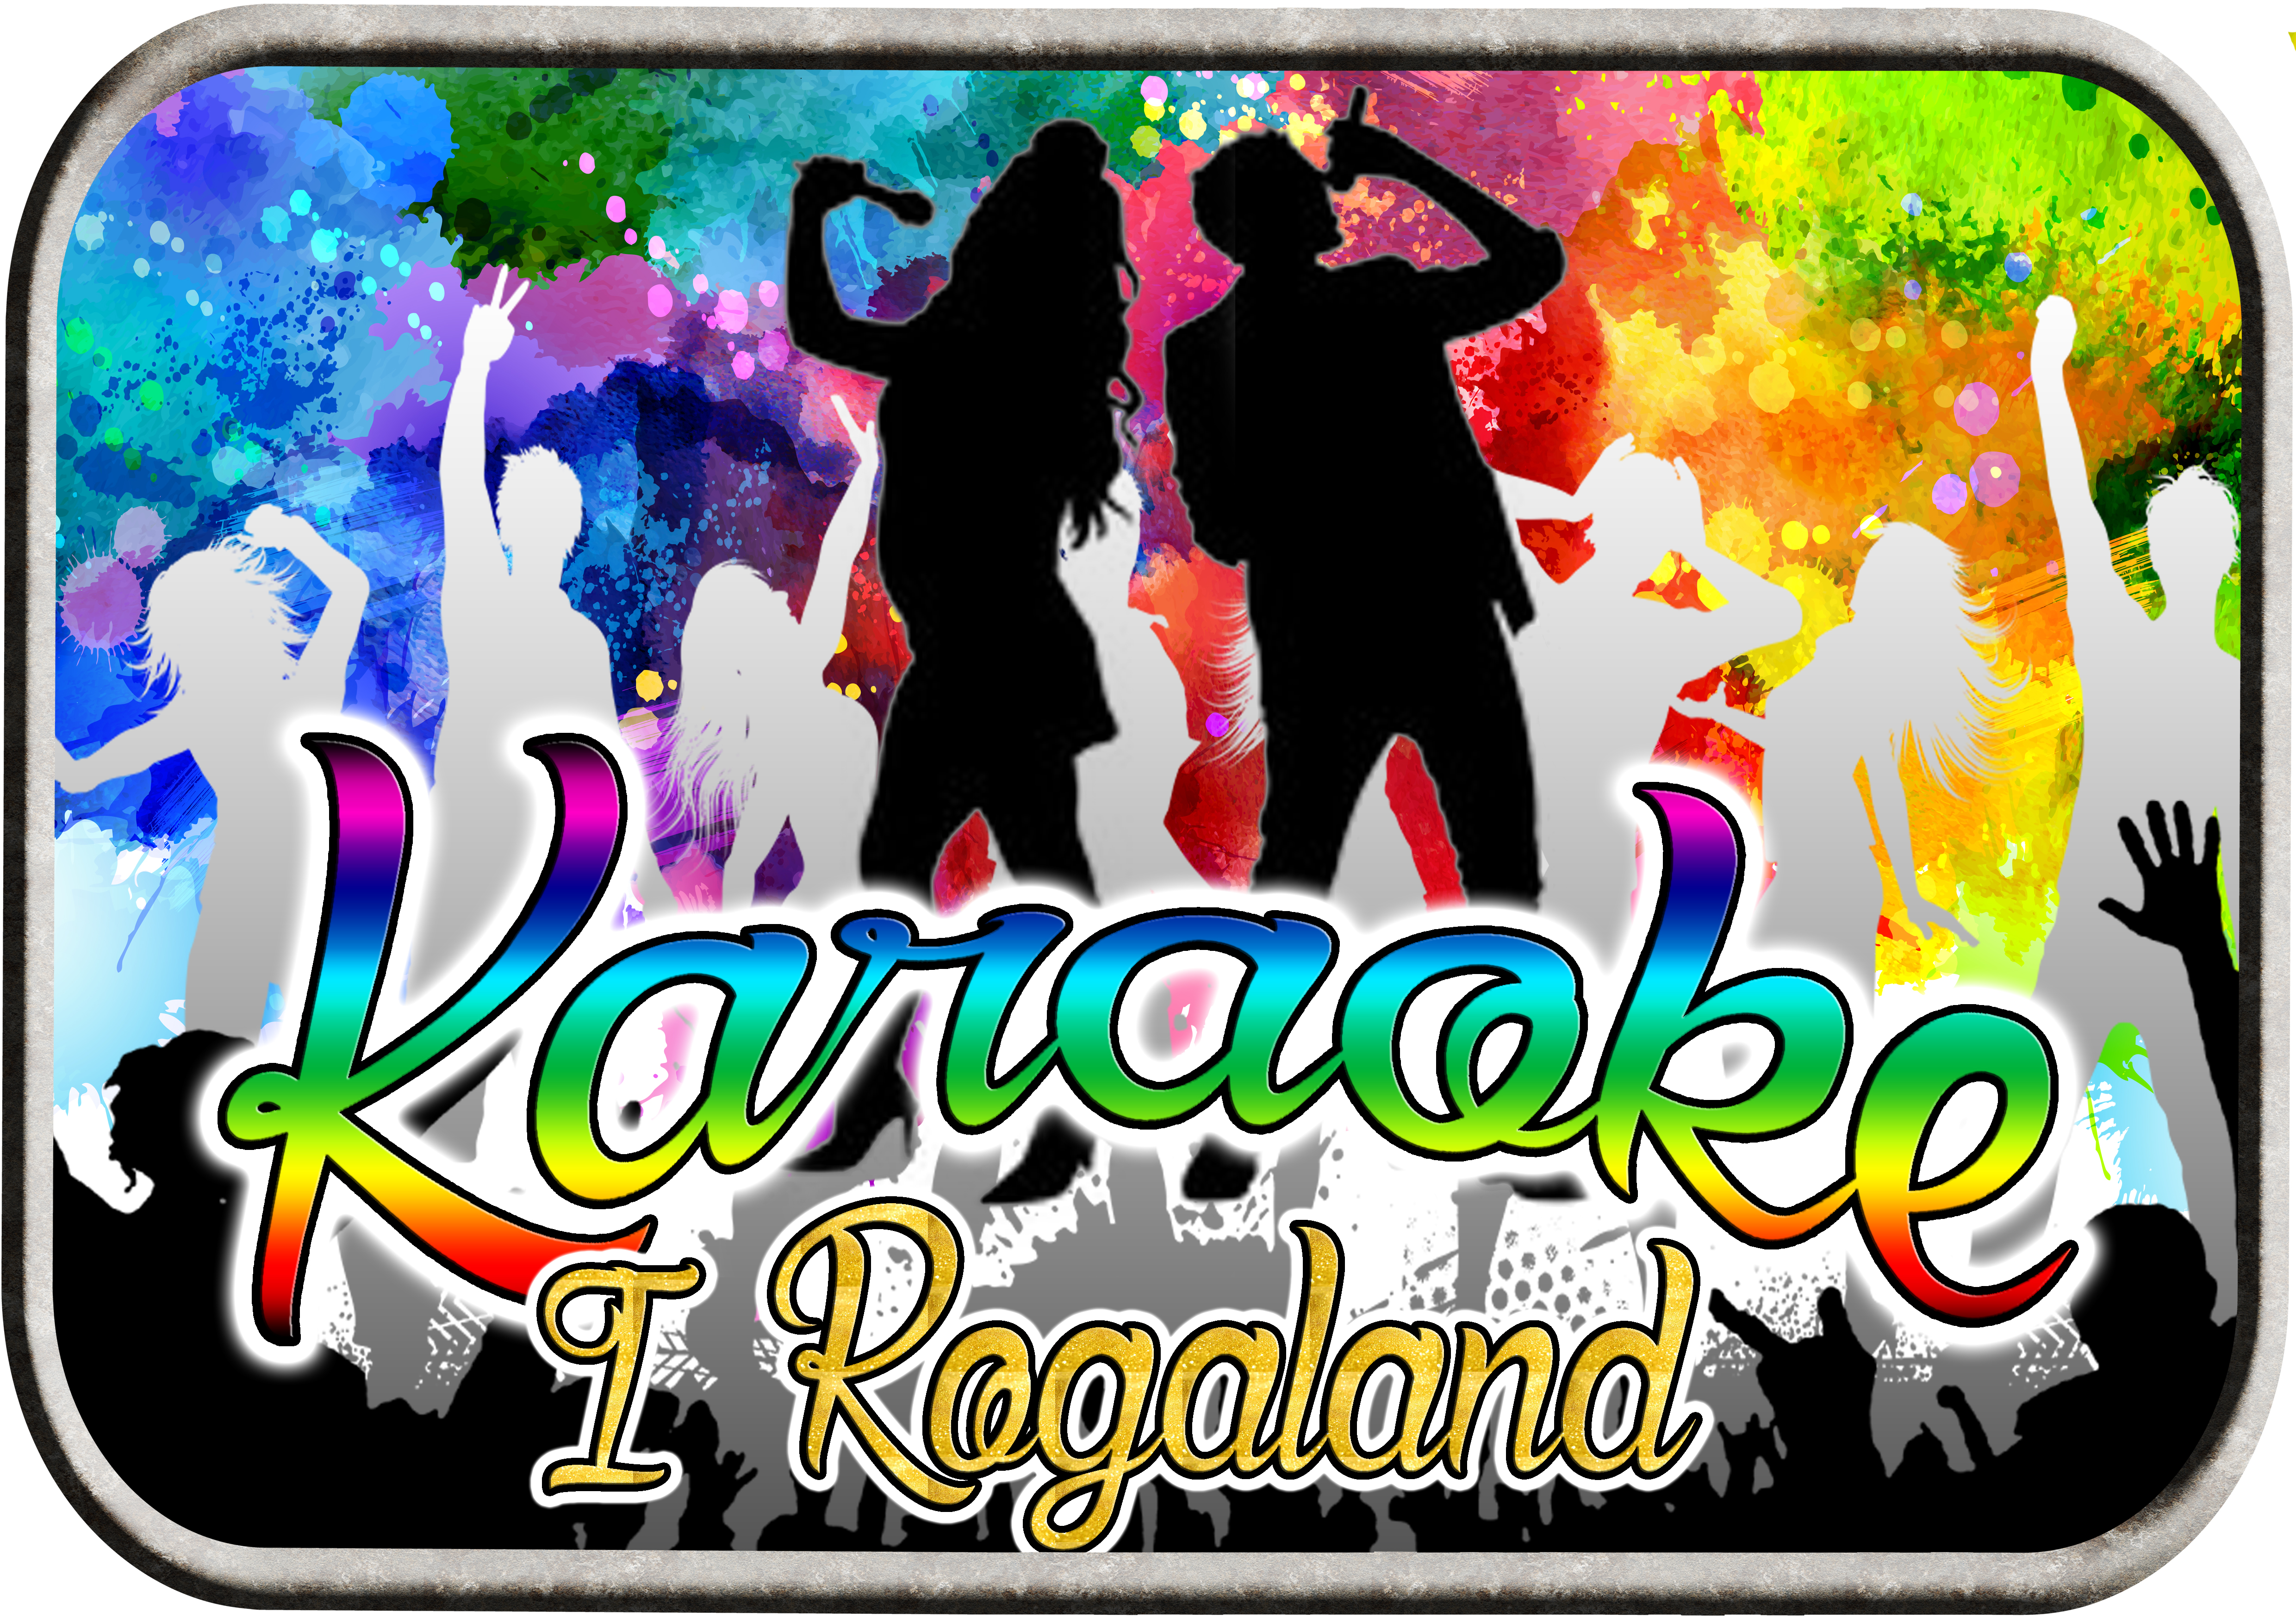 Logo for a Karaoke group in Rogaland, Norway